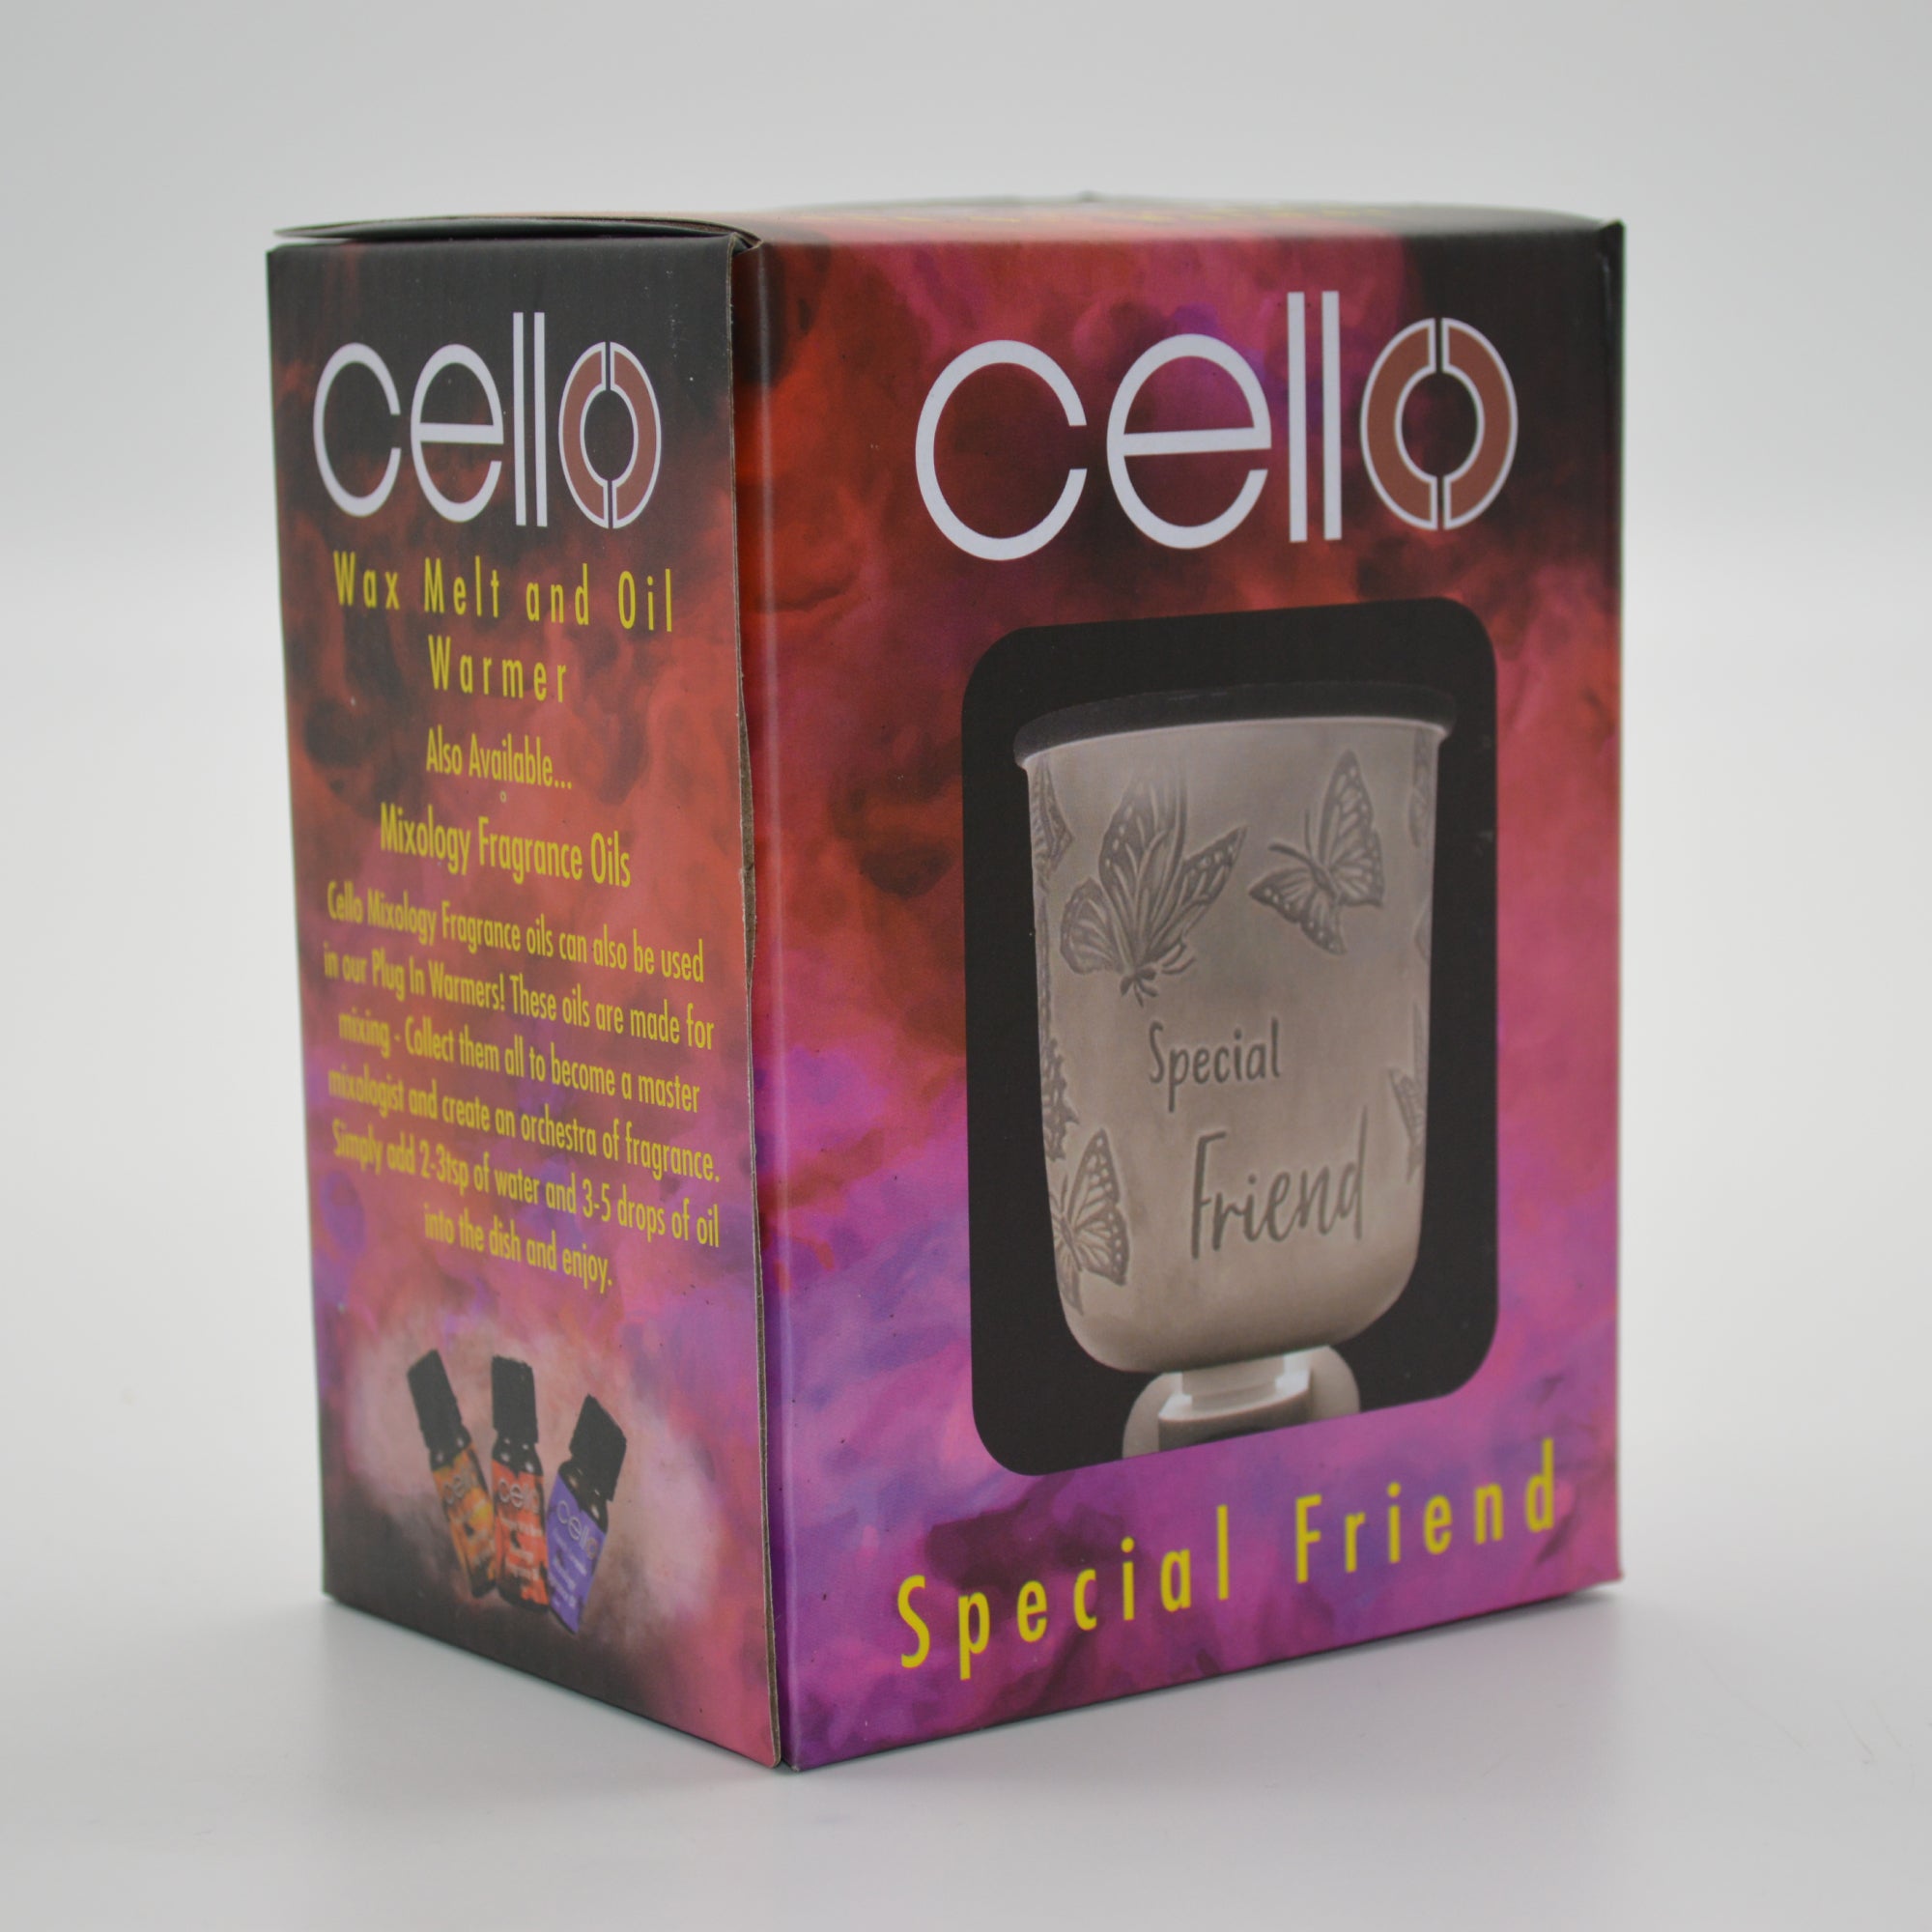 Cello - Porcelain Plug In Electric Melt Warmer - Special Friend